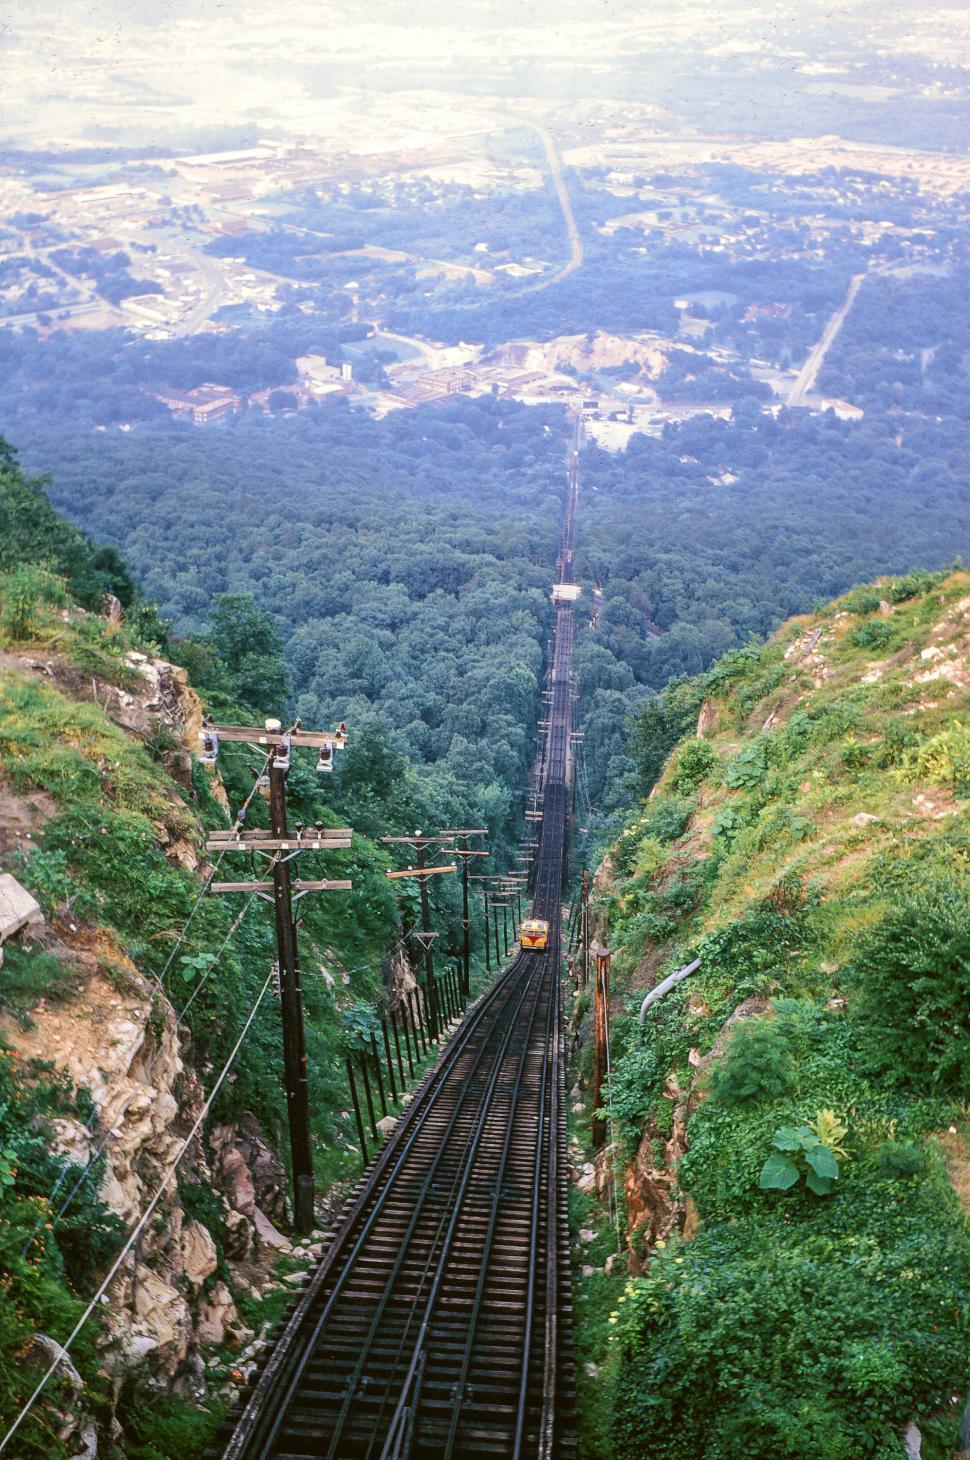 Free Image of Electric Locomotive Track between mountains 